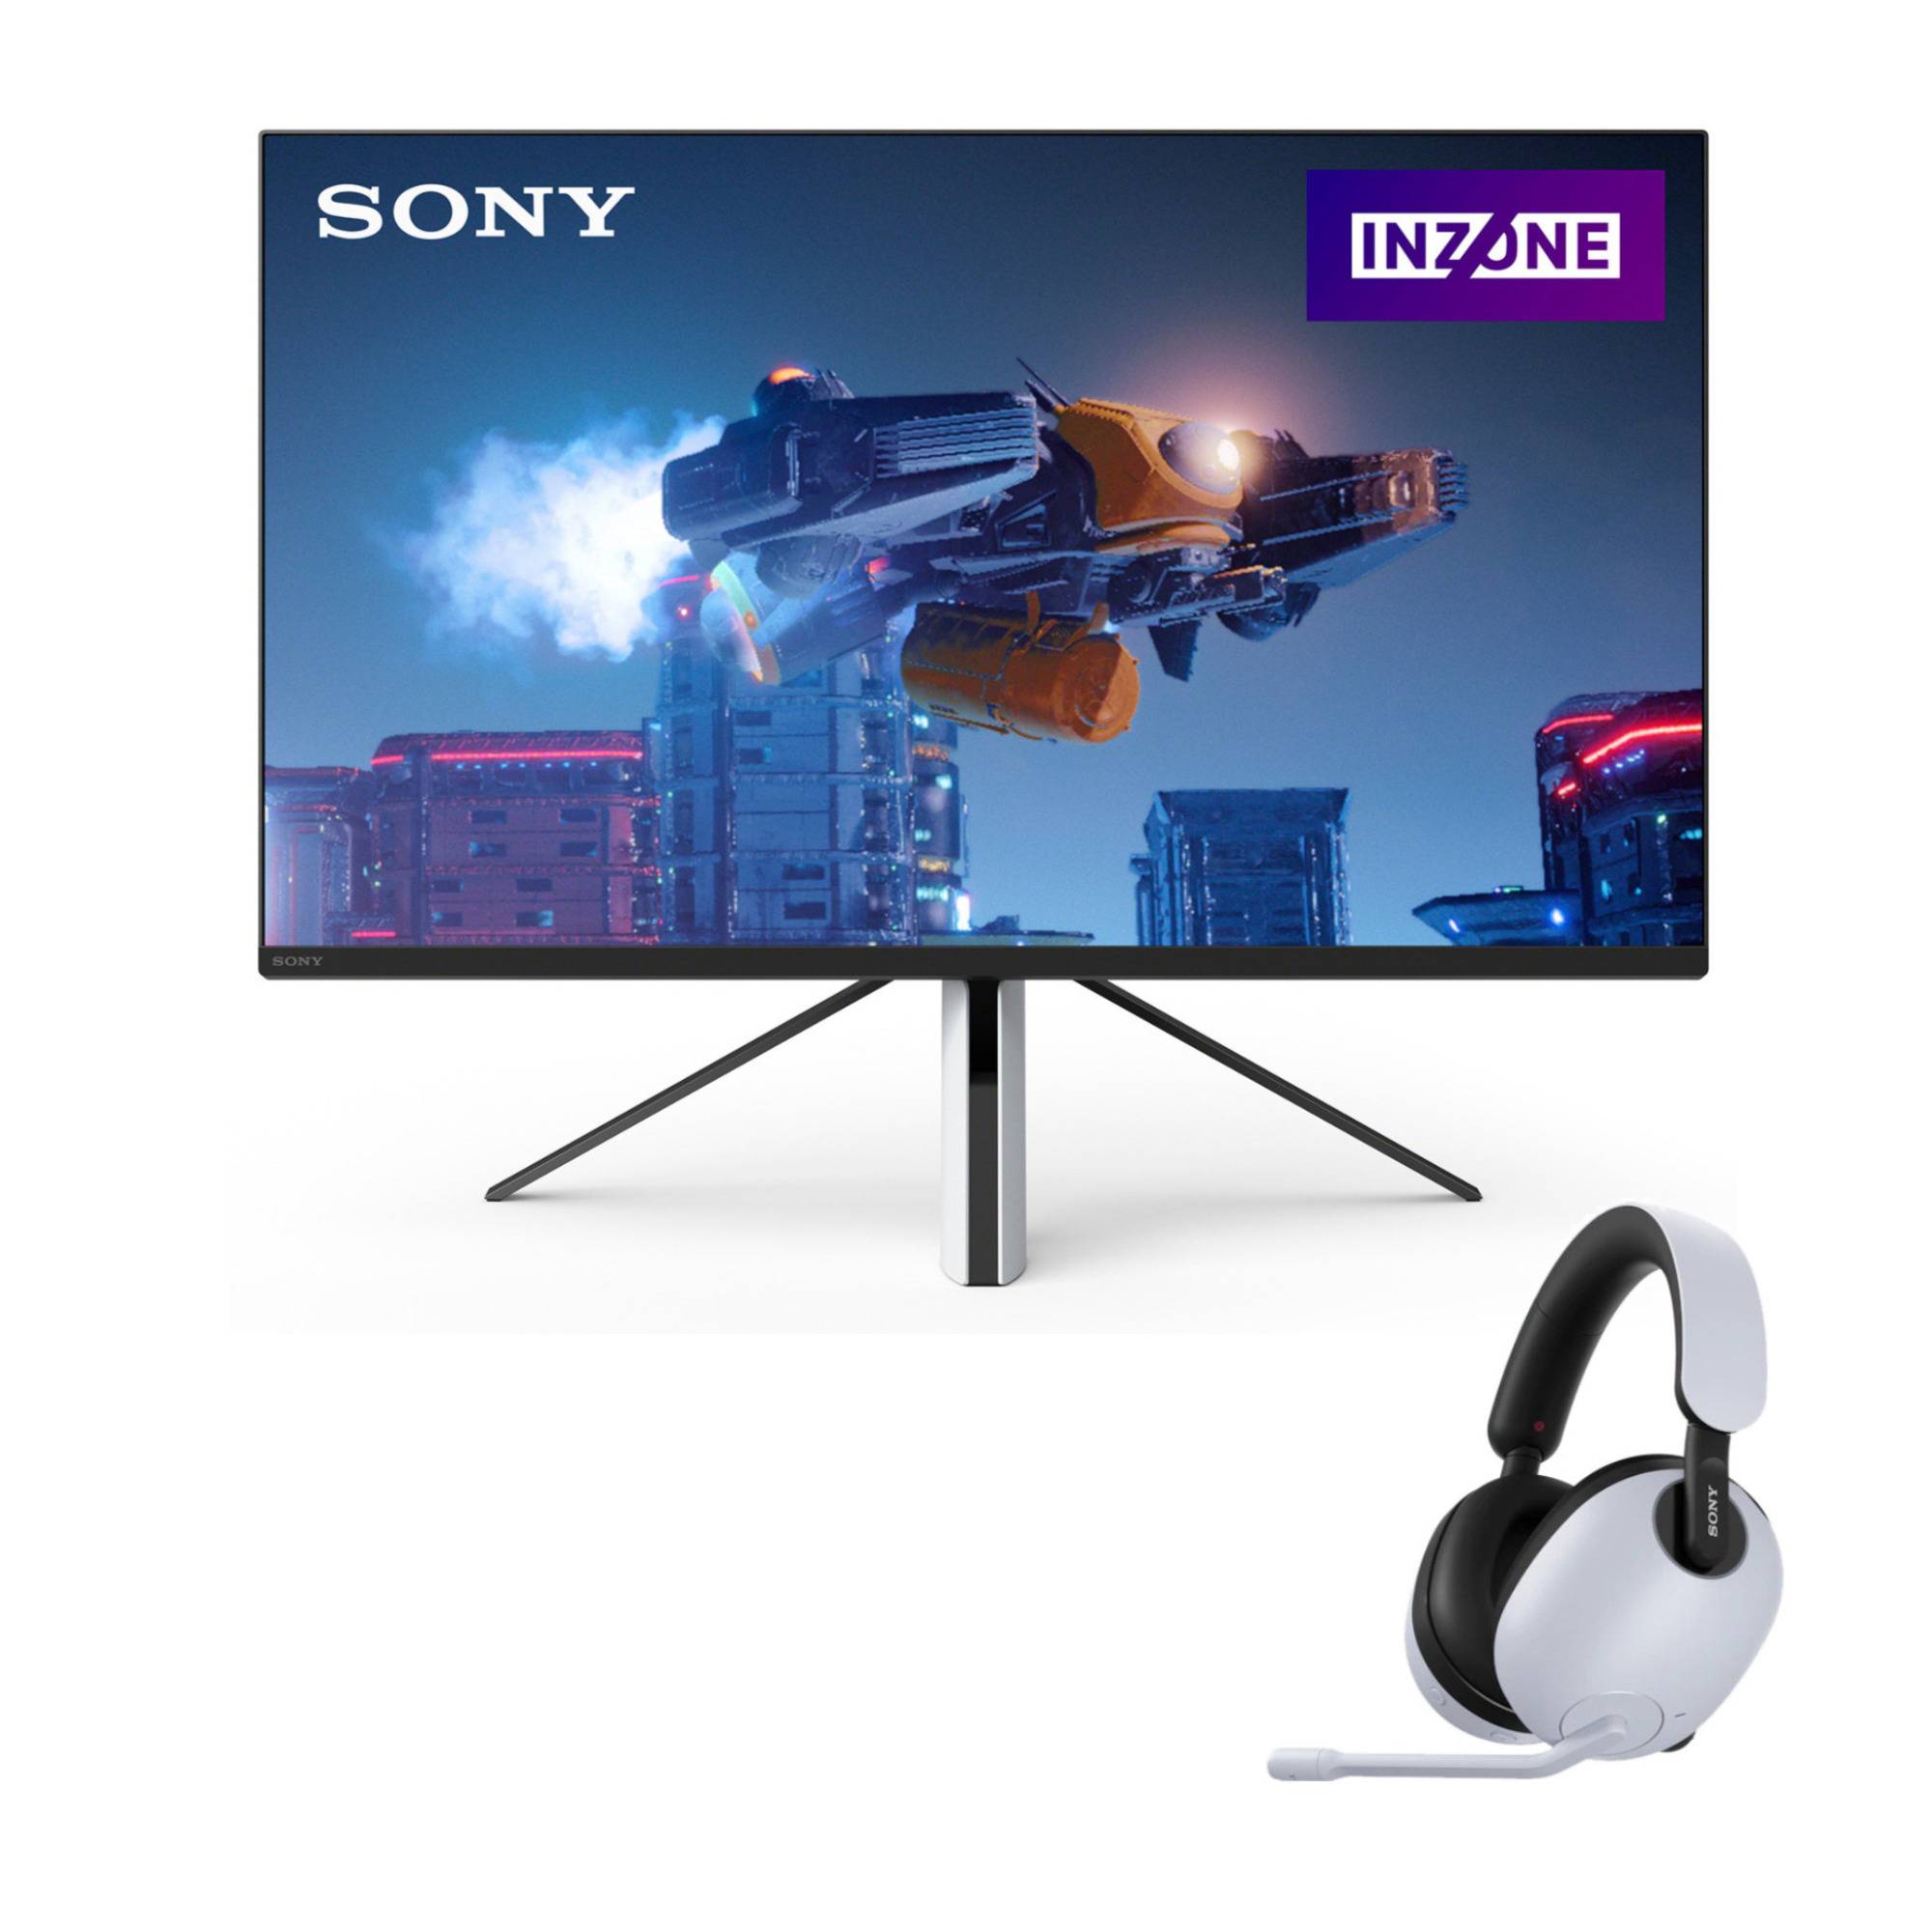 Sony 27-inch INZONE M3 Full HD HDR 240Hz Gaming Monitor with INZONE H9 Wireless NC Gaming Headset